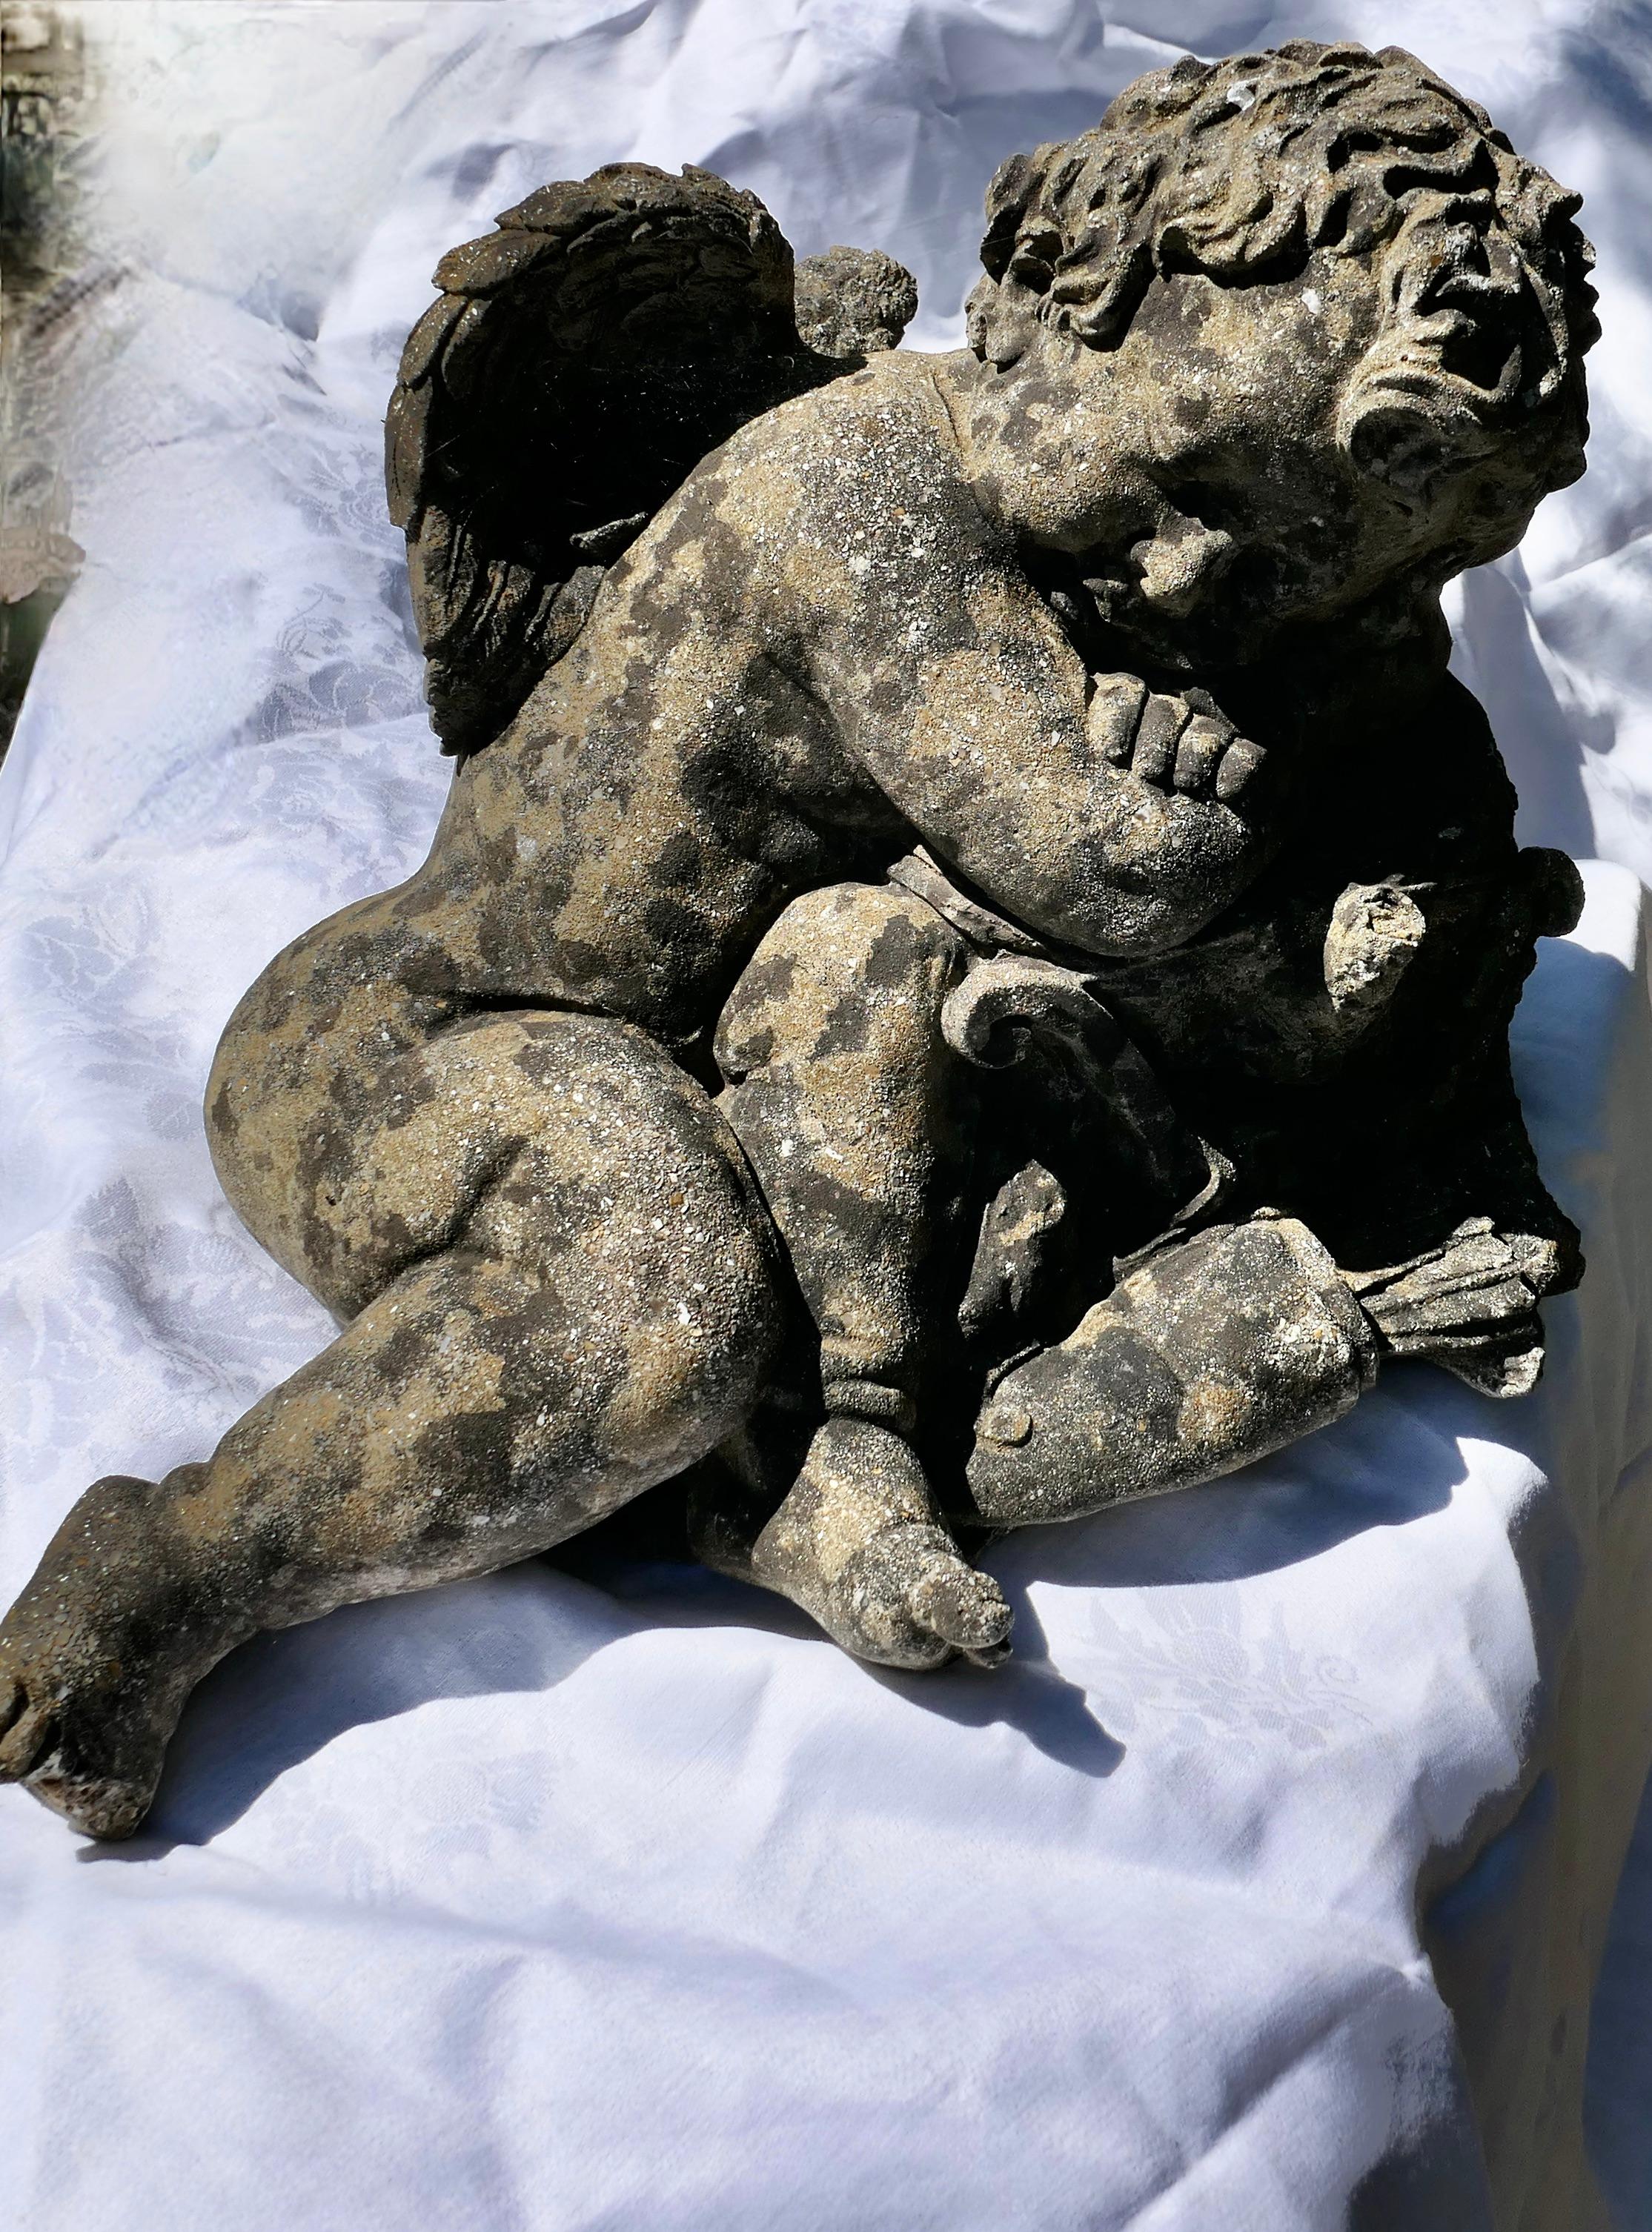 French weathered stone statue of a sleeping putti, baby cherub with wings

Sleeping in the sunshine with his head on his arms and dainty wings on his back
This charming little piece is old and in very weathered condition, he is in 3D detail and